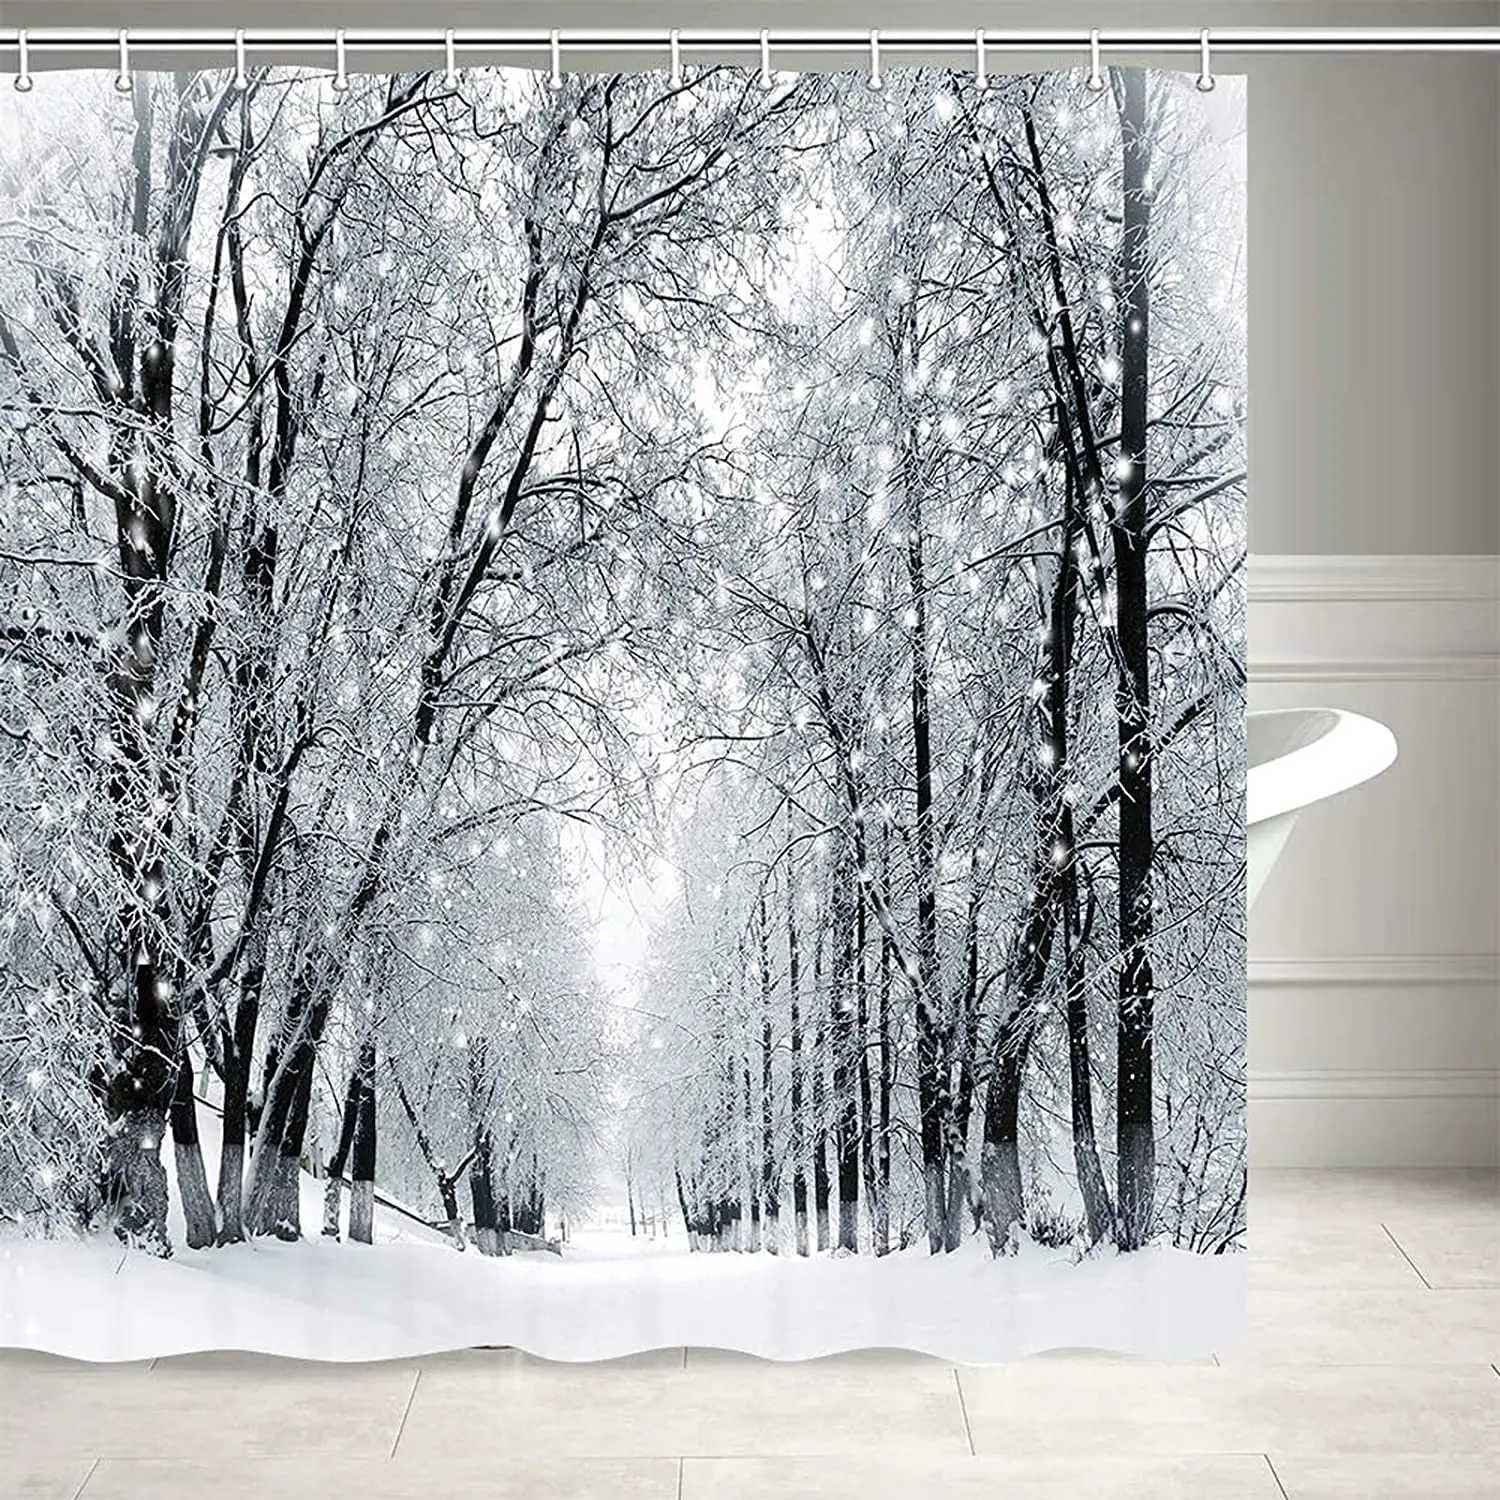 Fairy Winter Landscape Shower Curtain Frosty Trees and Snowstorm in City Park Christmas Curtains Bathroom Accessories With Hooks